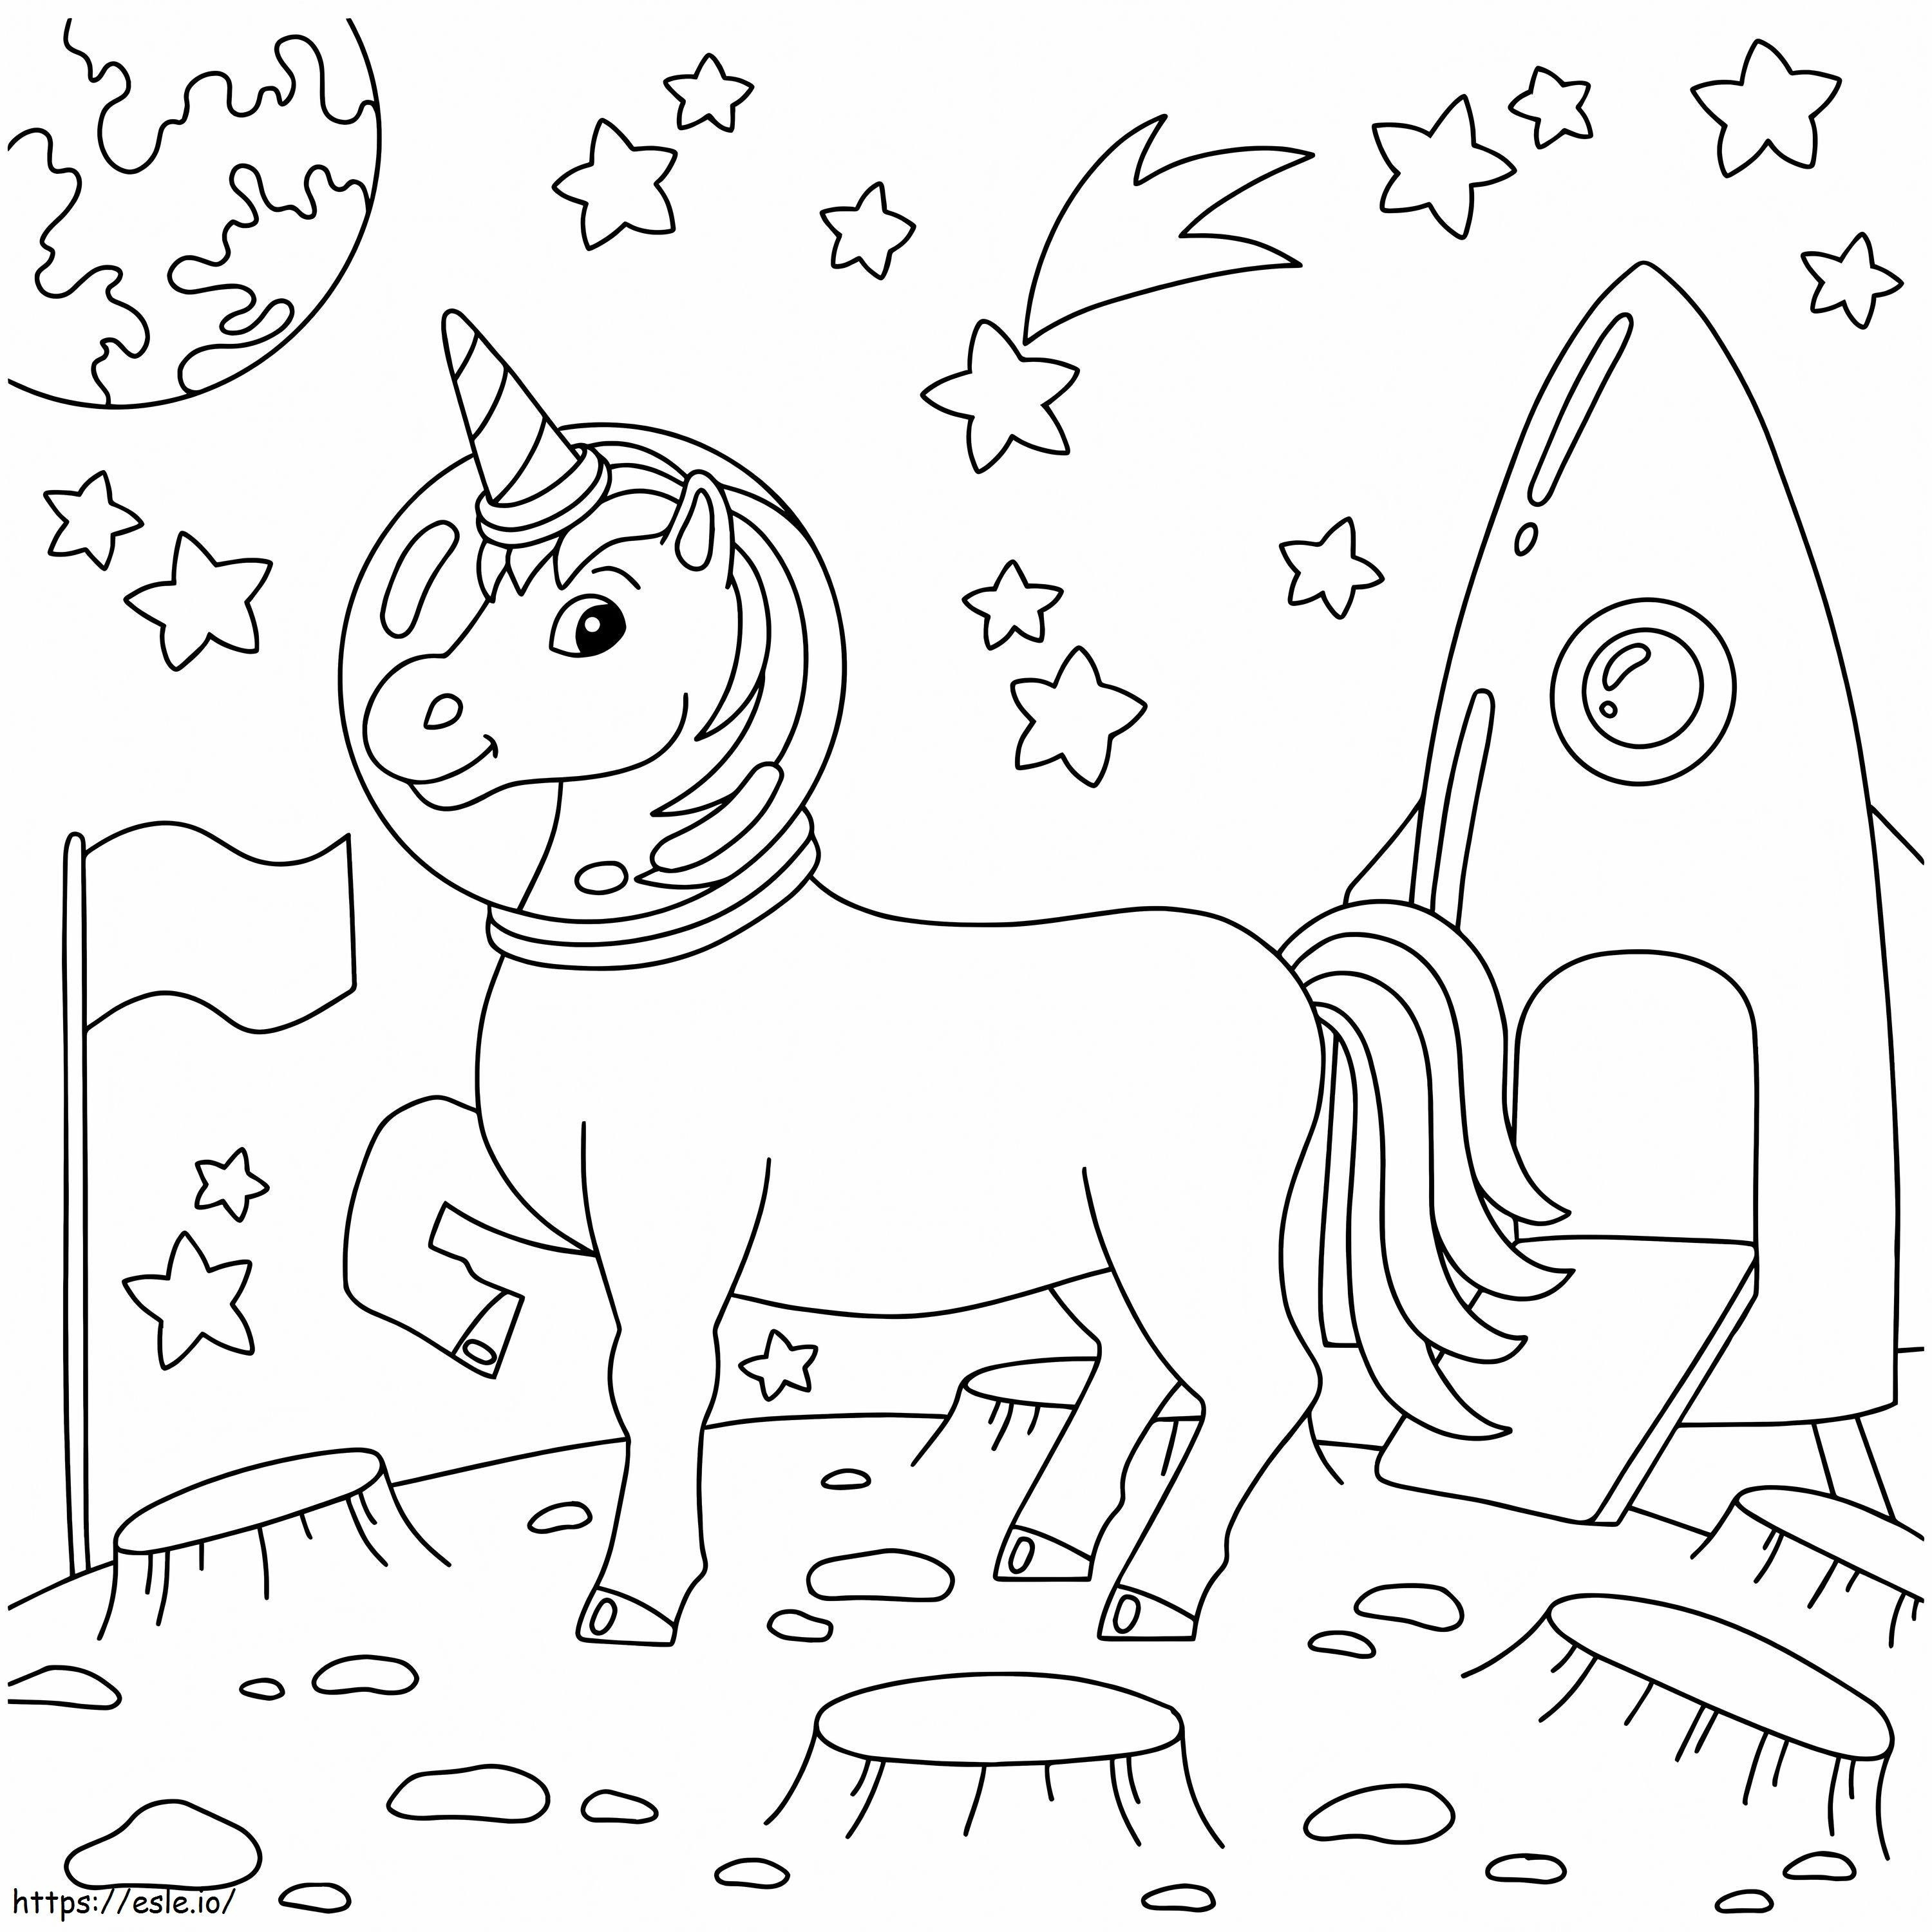 Unicorn Astronaut Landed On Another Planet coloring page